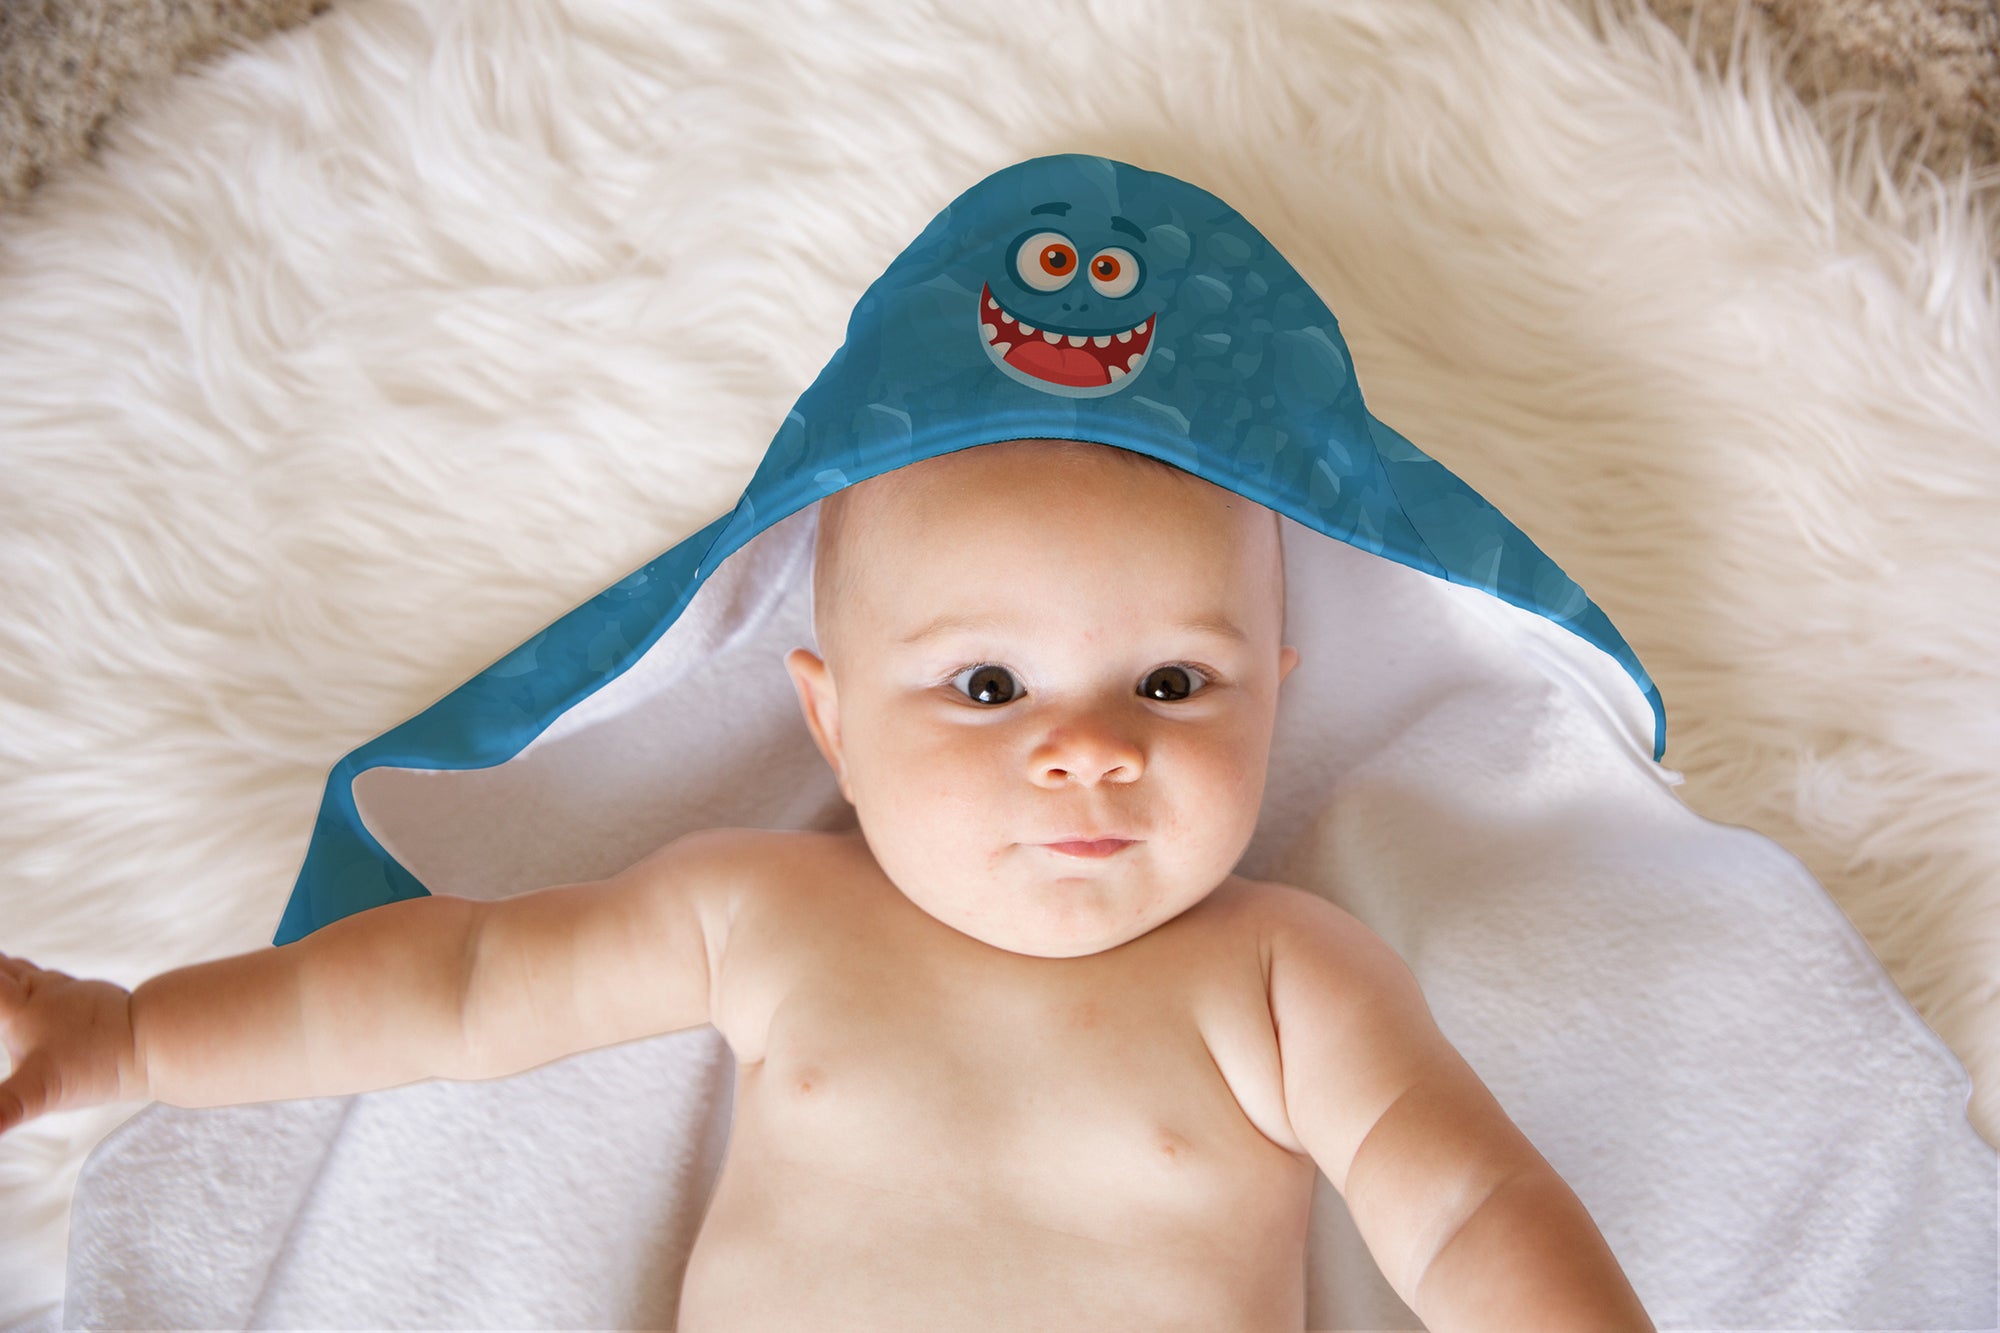 Buy this Blue Monster Soft and Absorbent Hooded Baby Towel